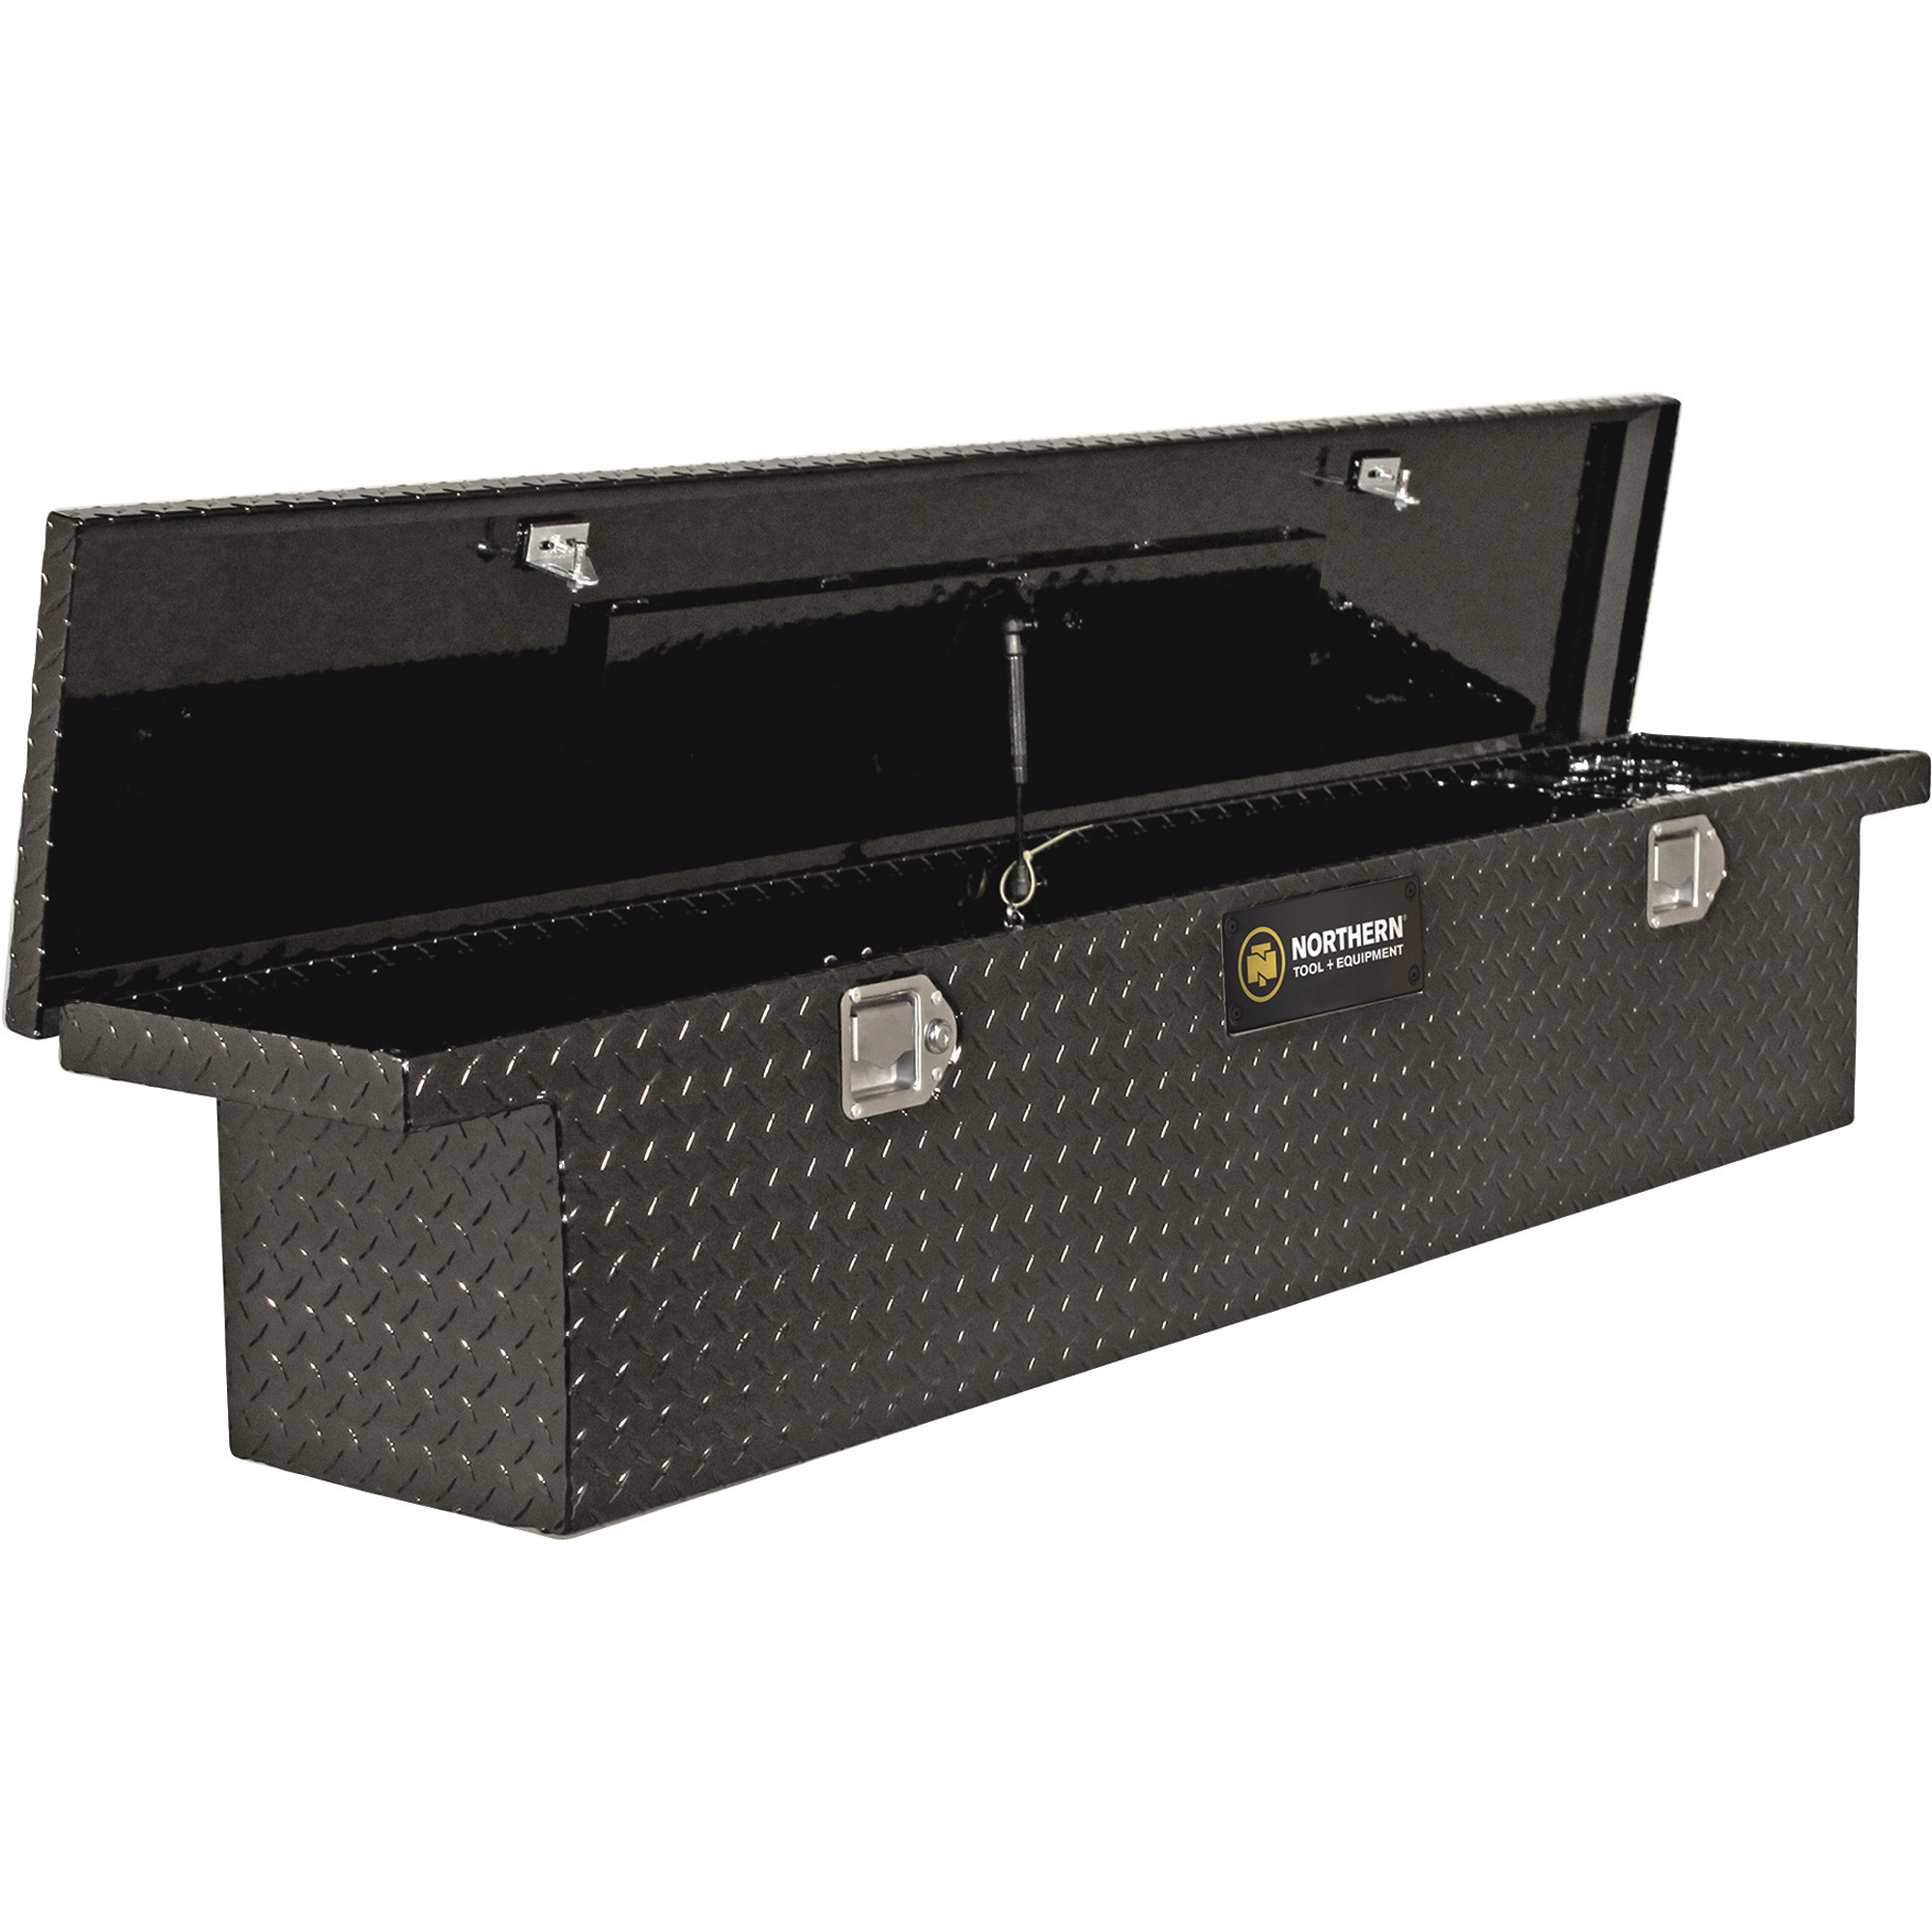 Northern Tool Slim Low Profile Crossover Truck Tool Box - Aluminum, Gloss Black, Paddle Latches, 69in. x 12in. x 13in, Model#36212712